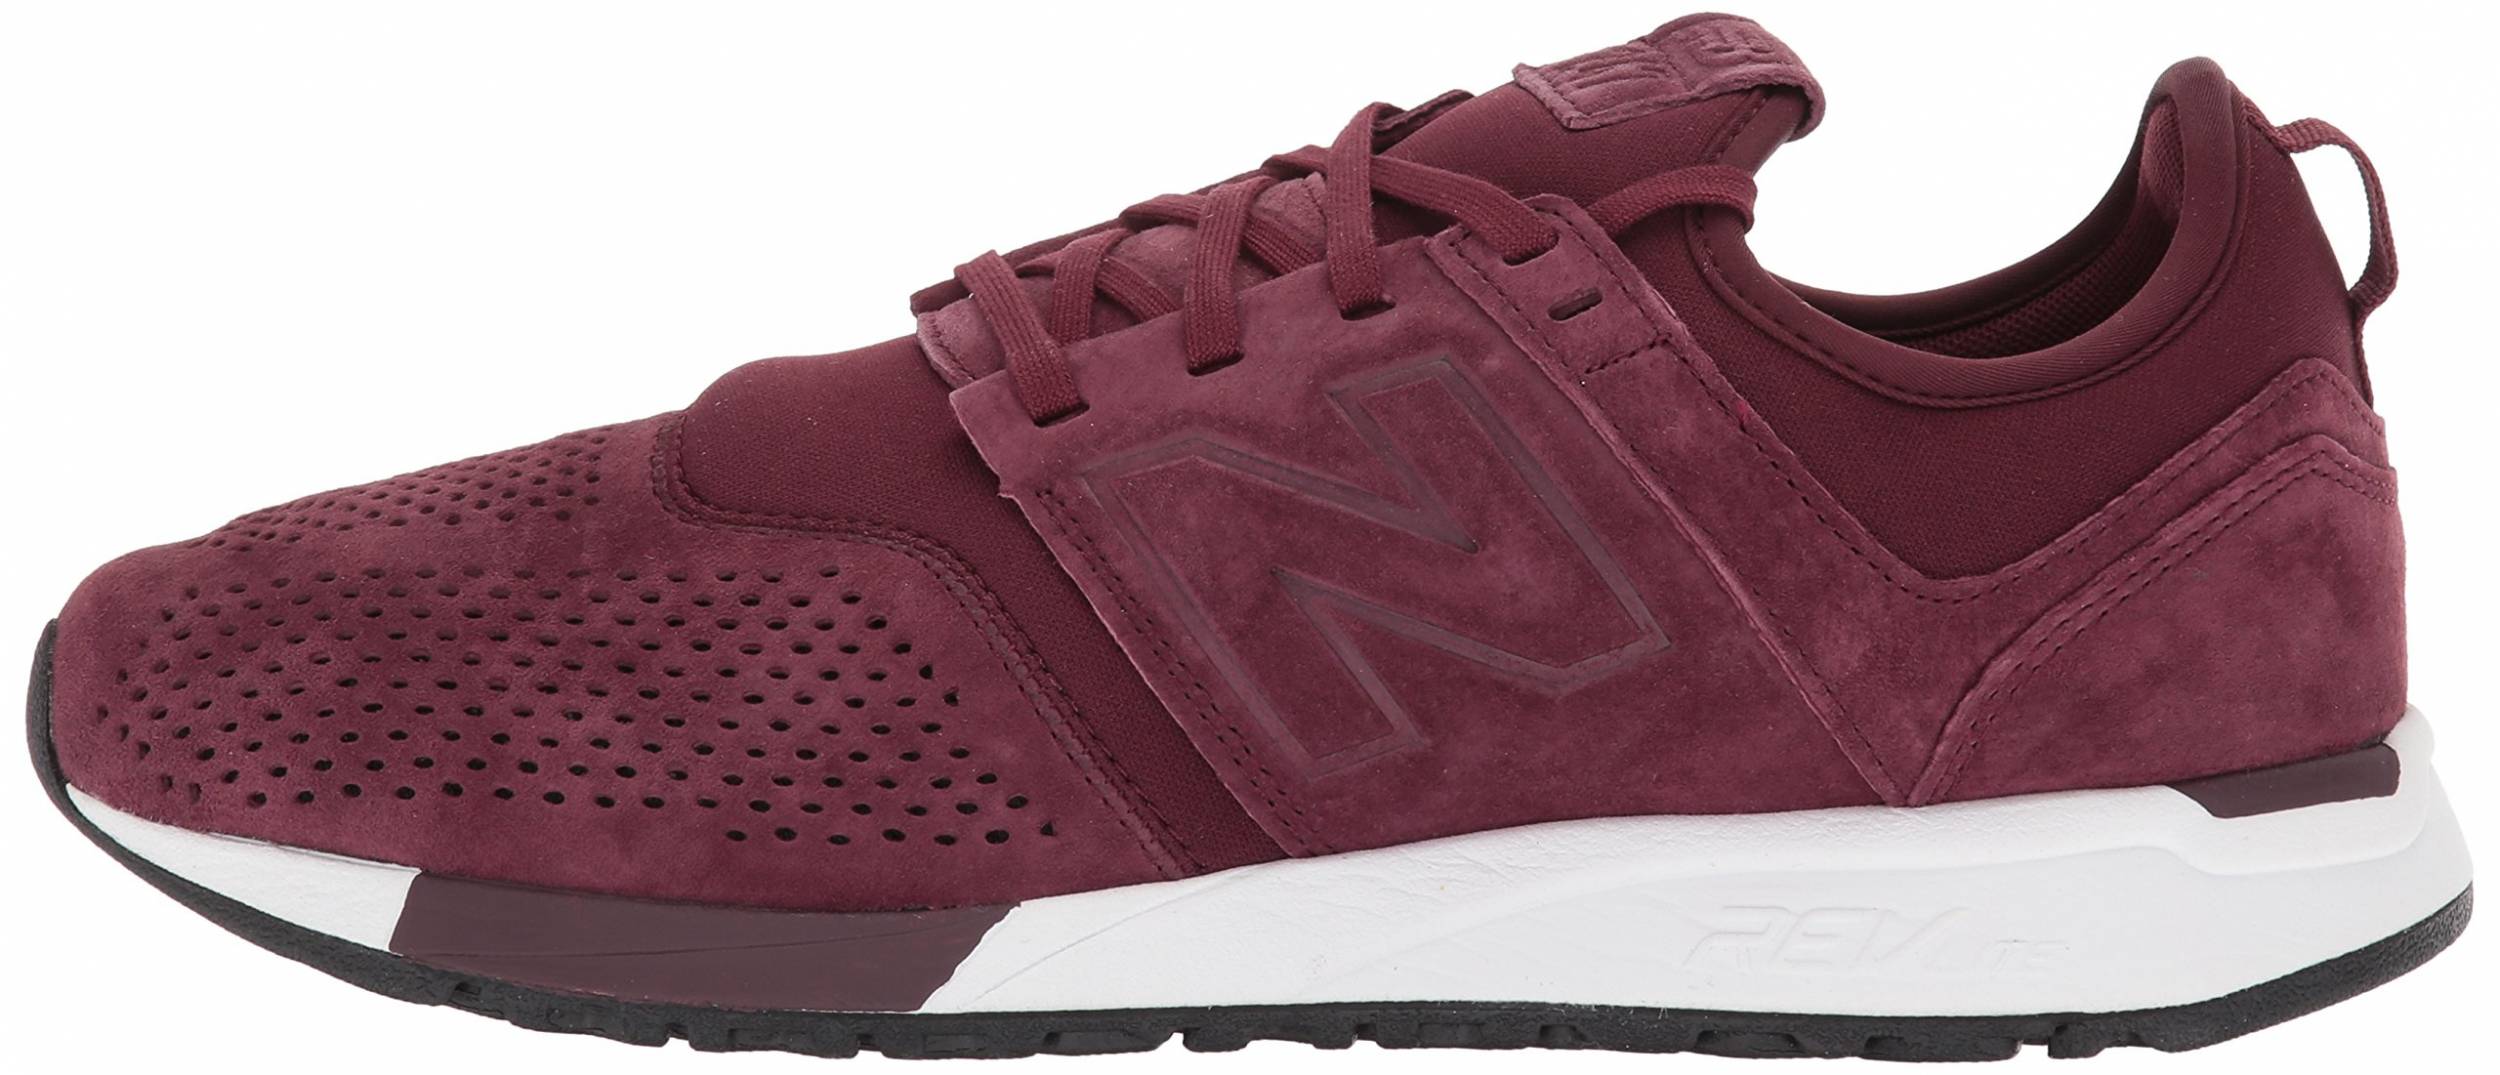 New Balance Suede 247 sneakers (only $80) | RunRepeat